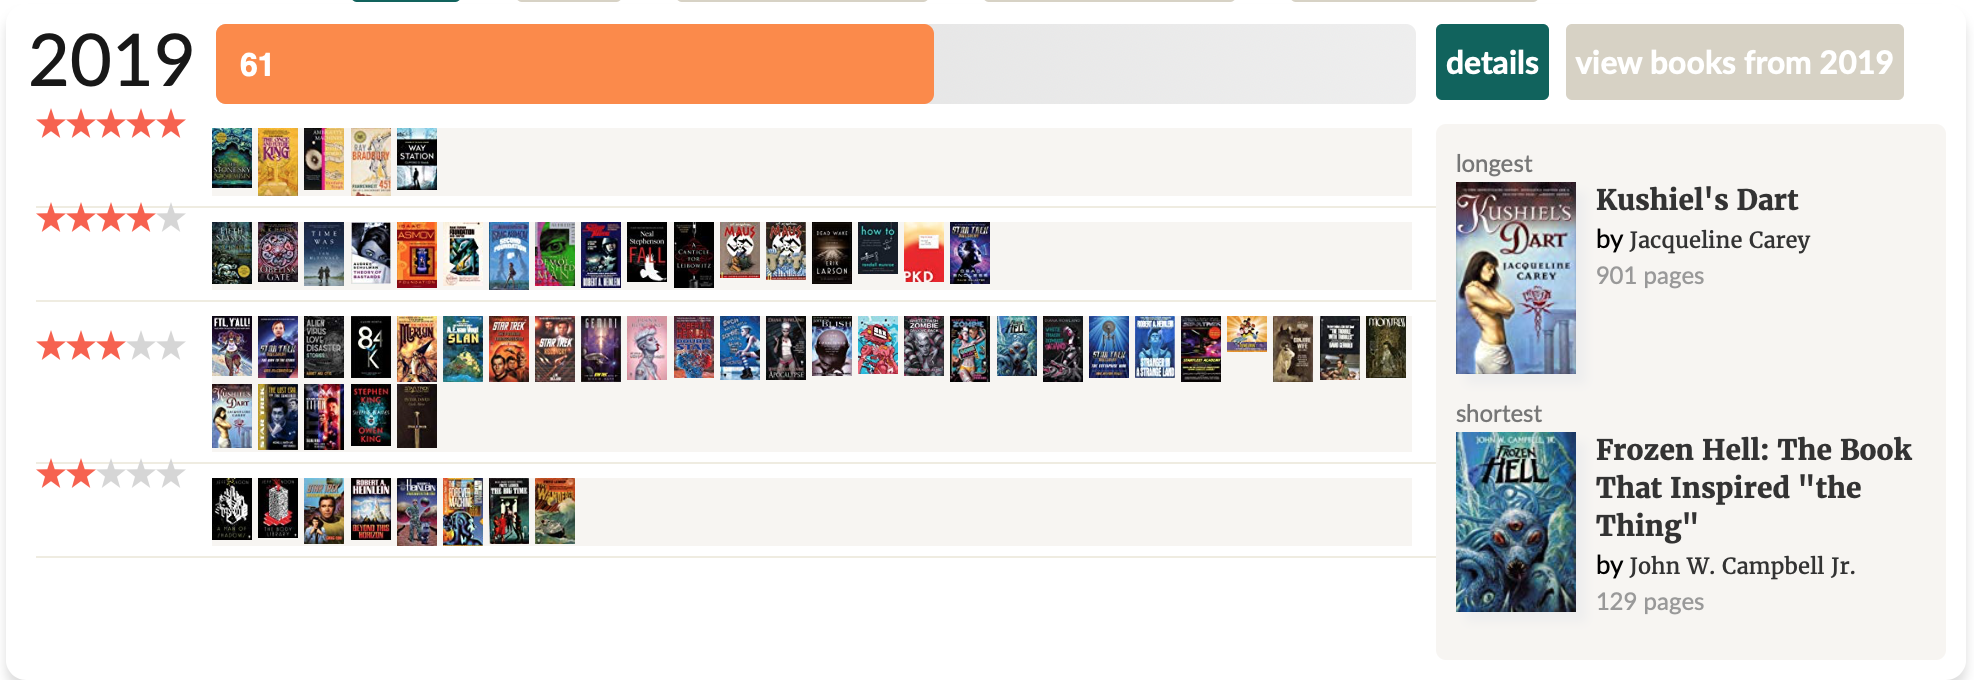 My 2019 reading stats from Goodreads